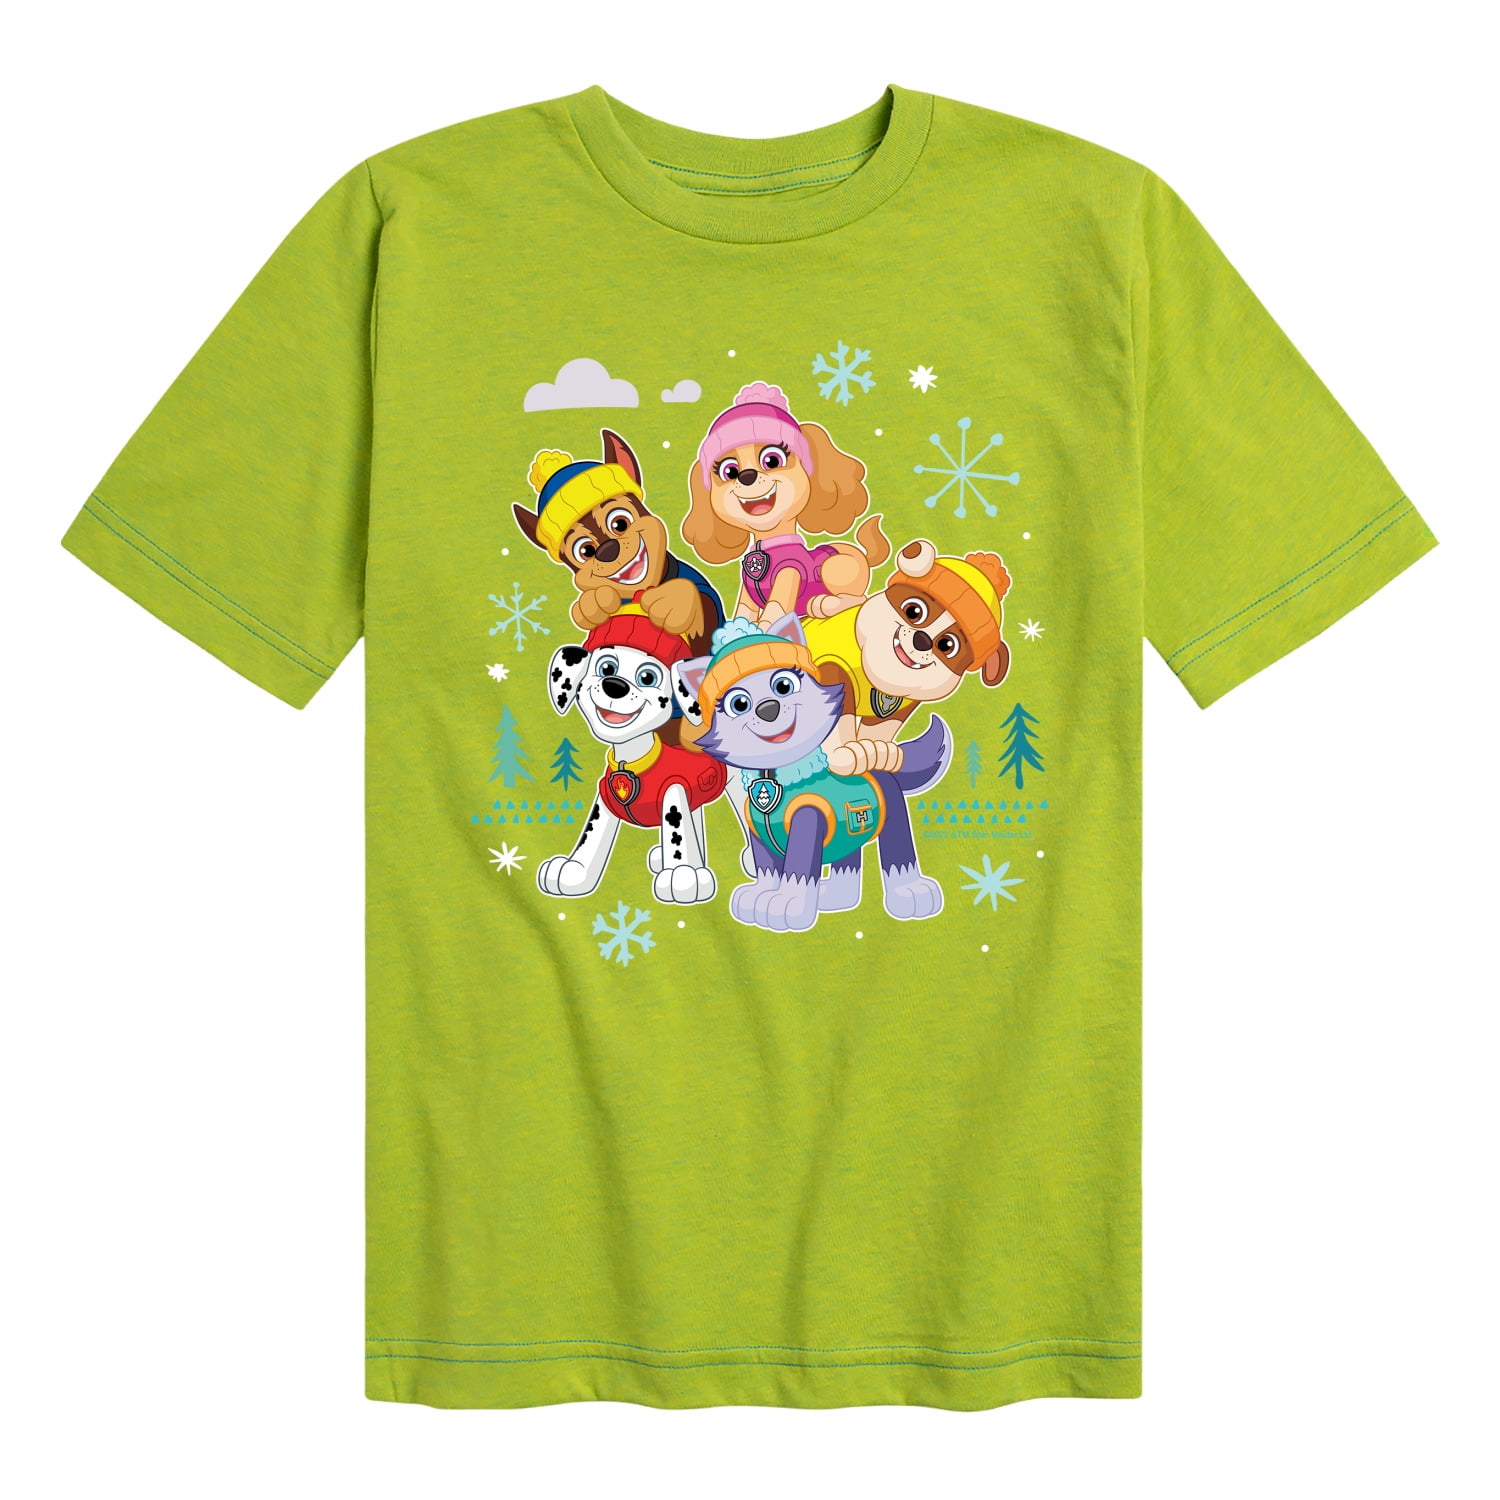 Patrol Patrol And Paw Toddler Sleeve - T-Shirt - Youth Group Graphic Paw Short Icons With